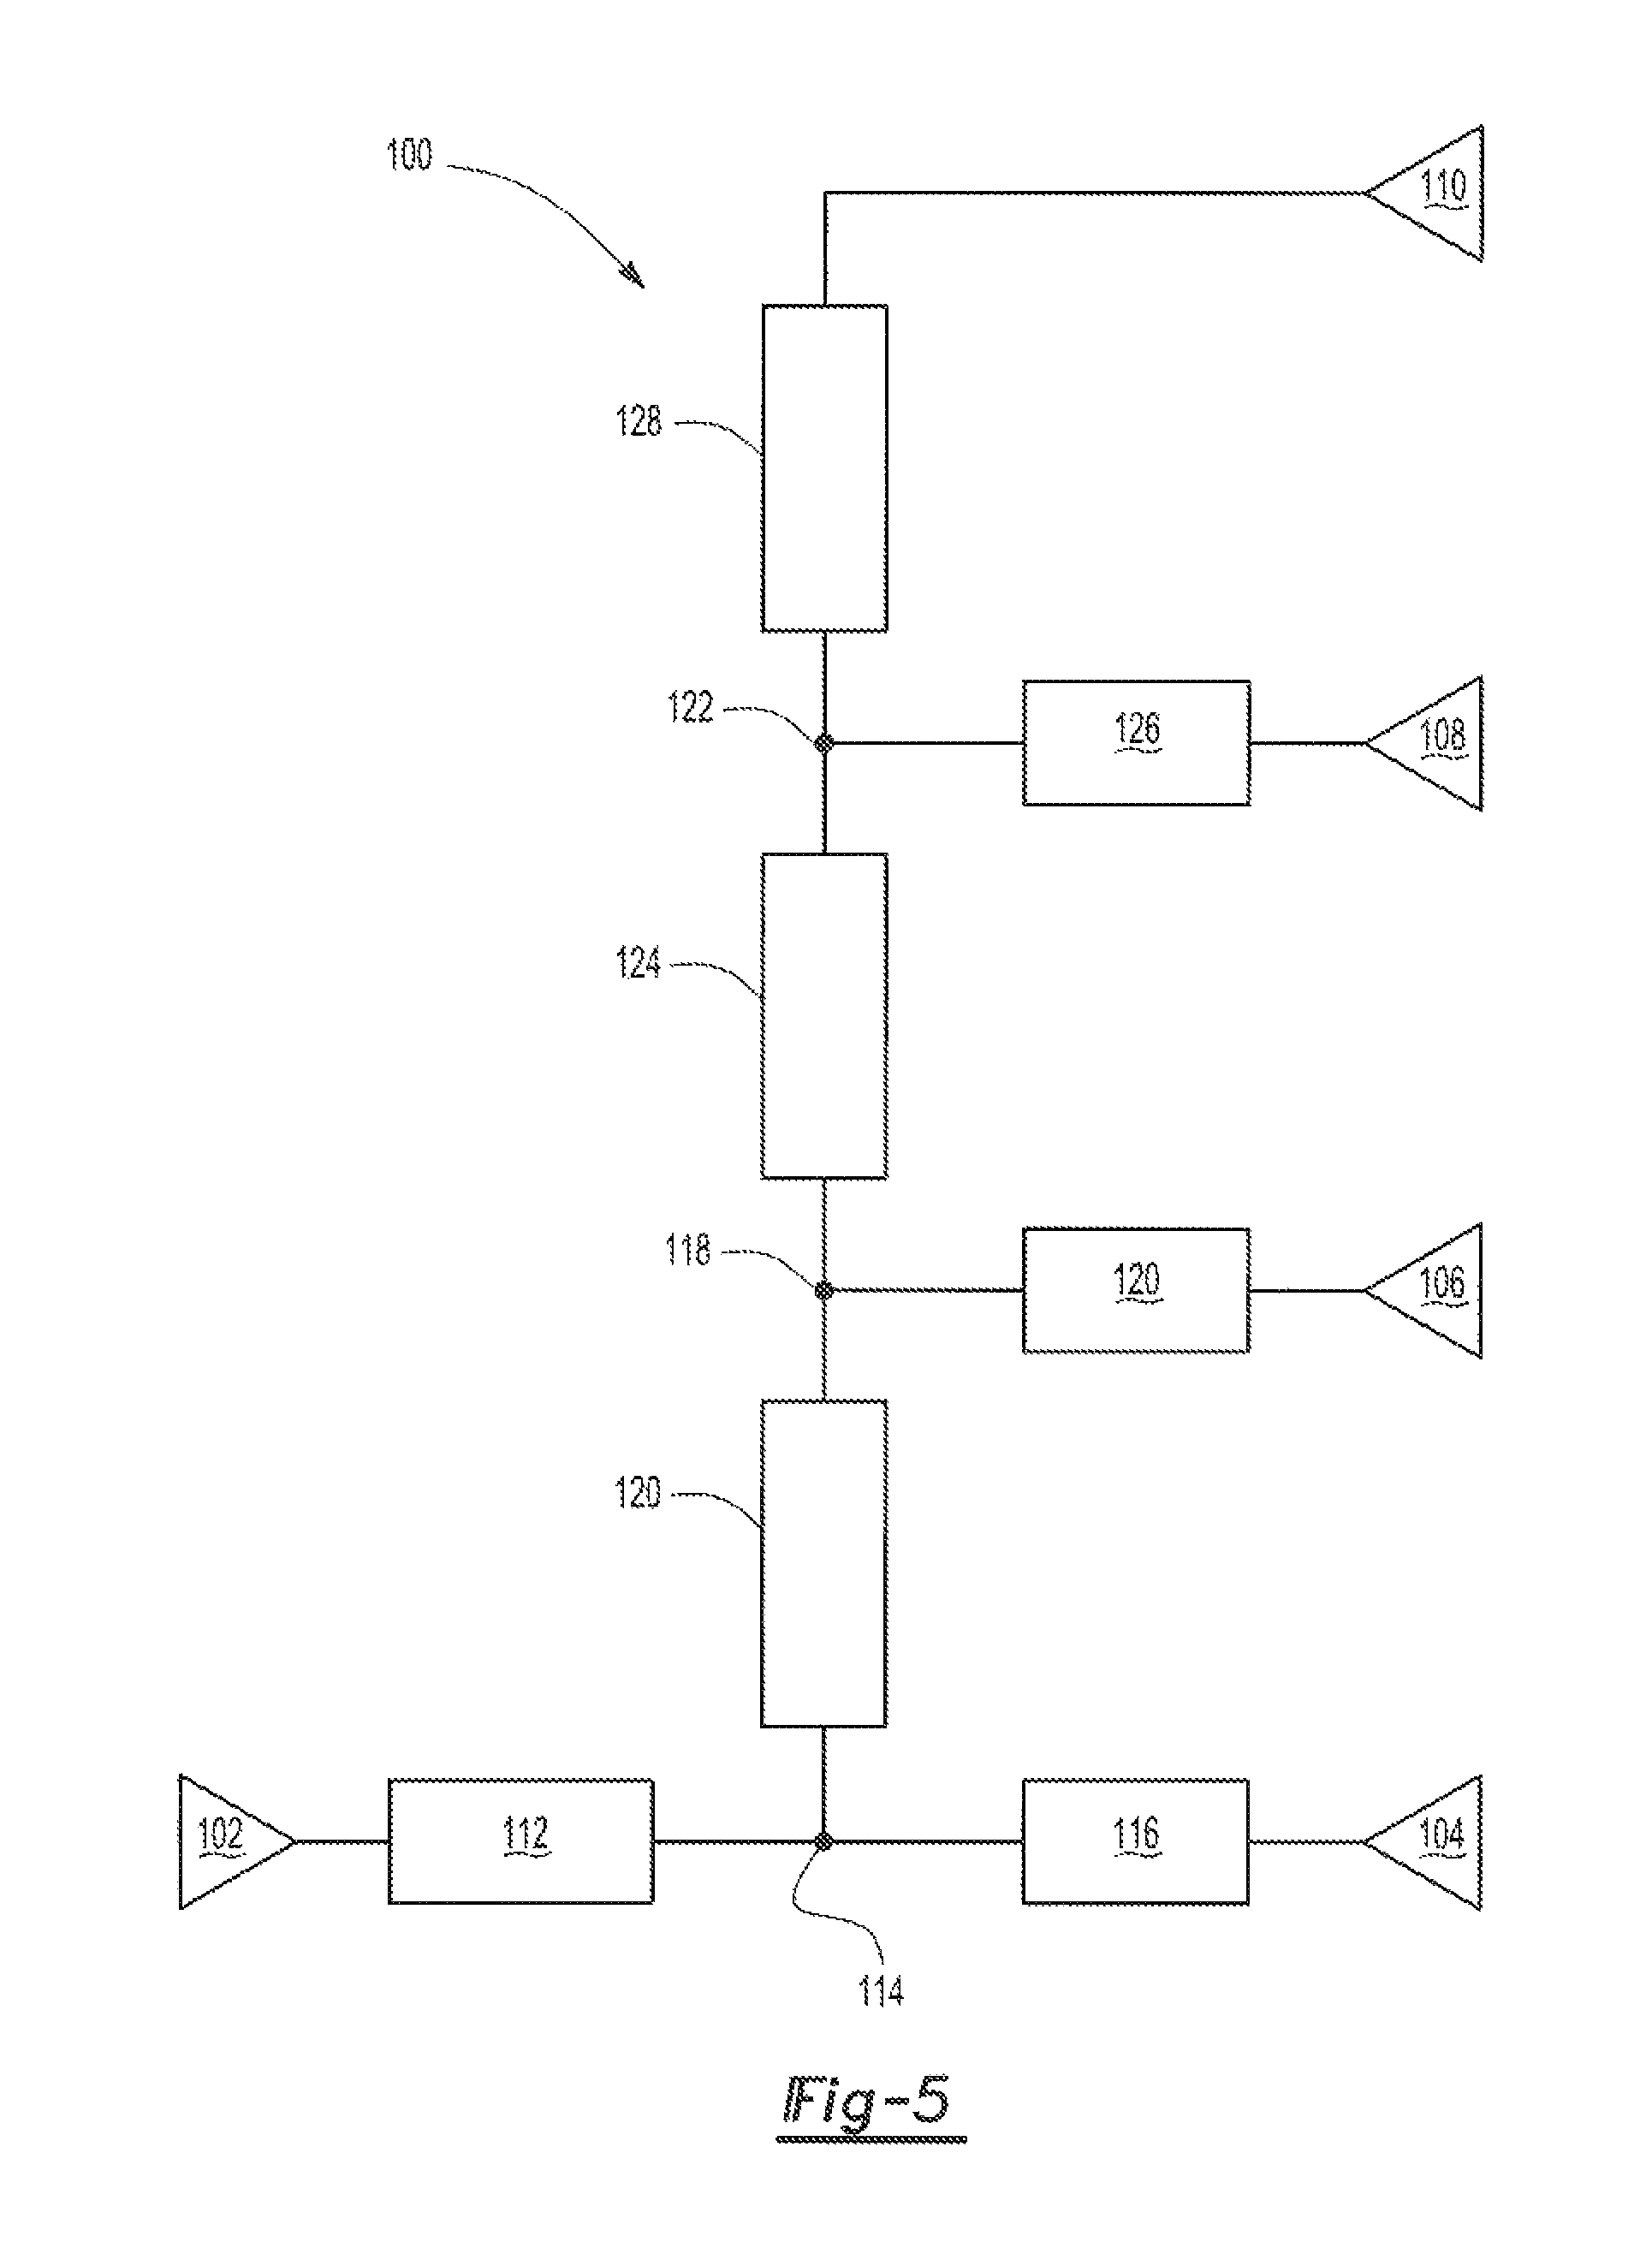 Power dividing and power combining circuits